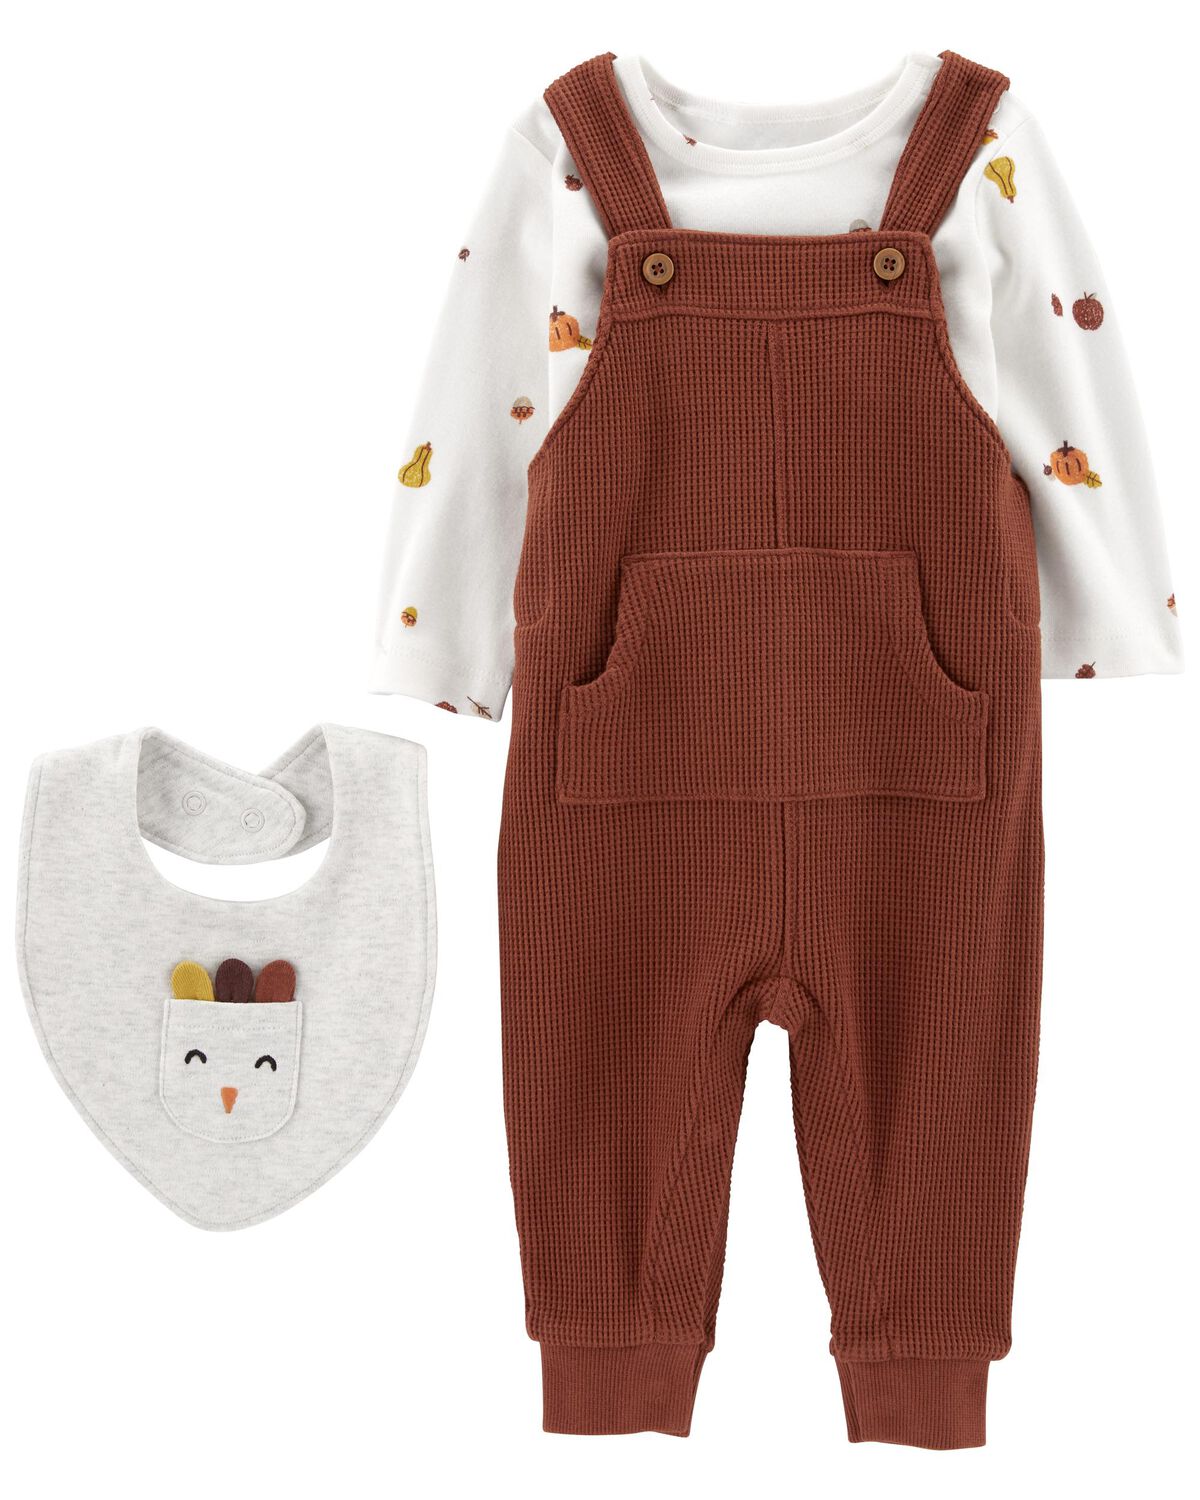 Brown/White Baby 3-Piece Thanksgiving Outfit Set | carters.com